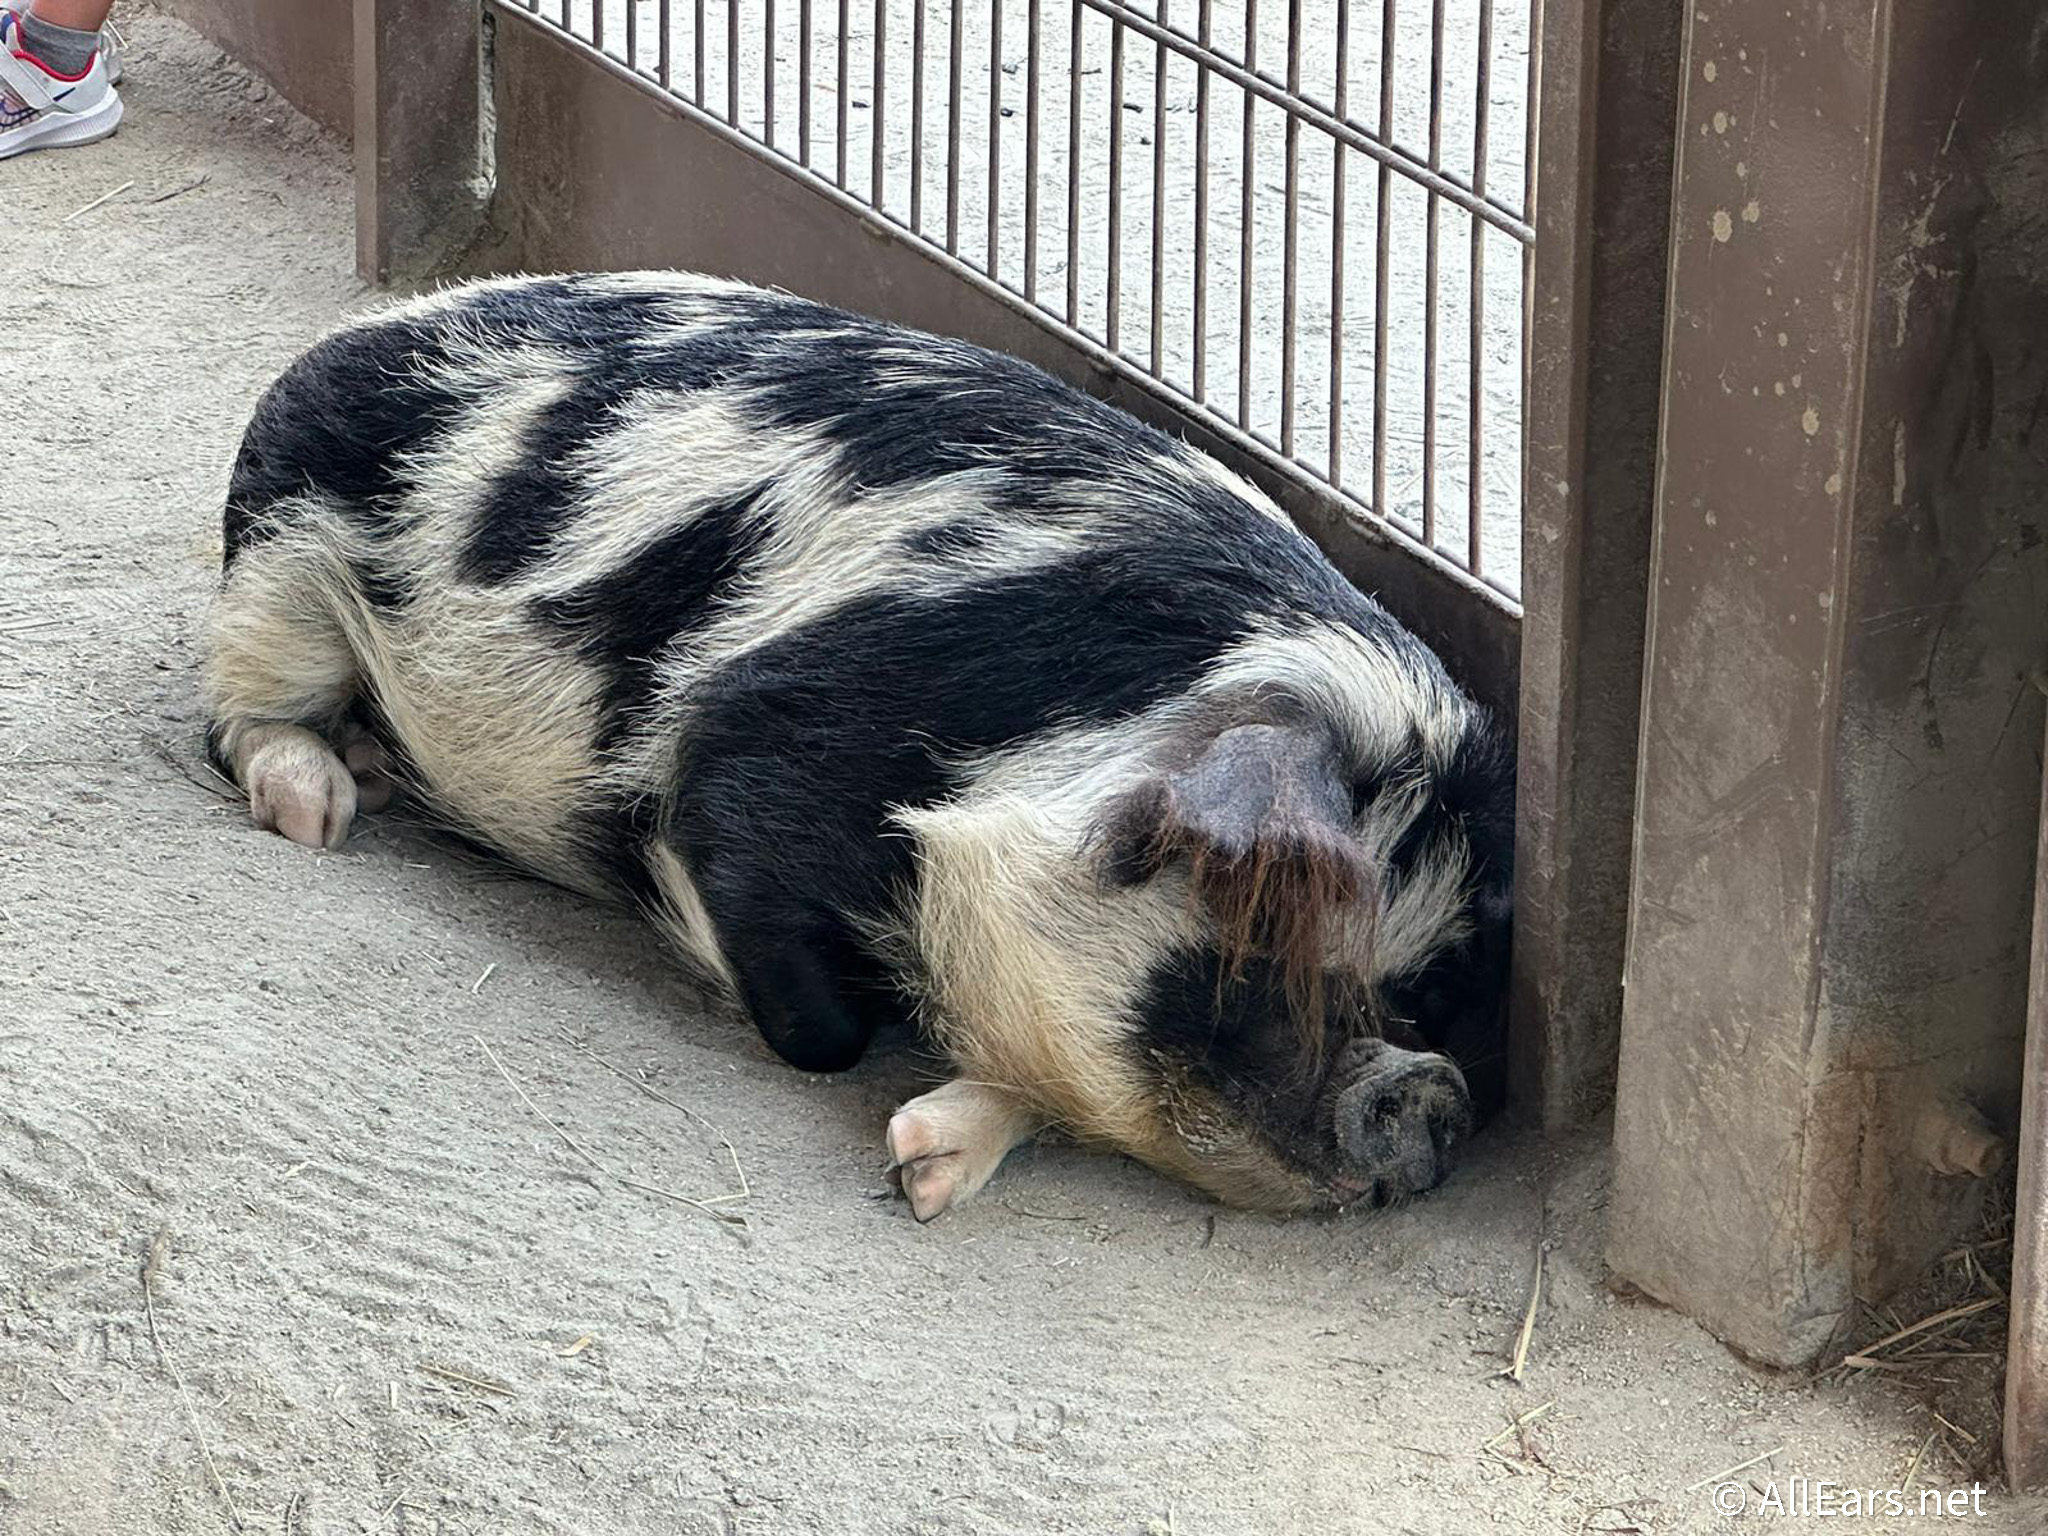 You Can Meet Pua the Pig in Disney World - AllEars.Net